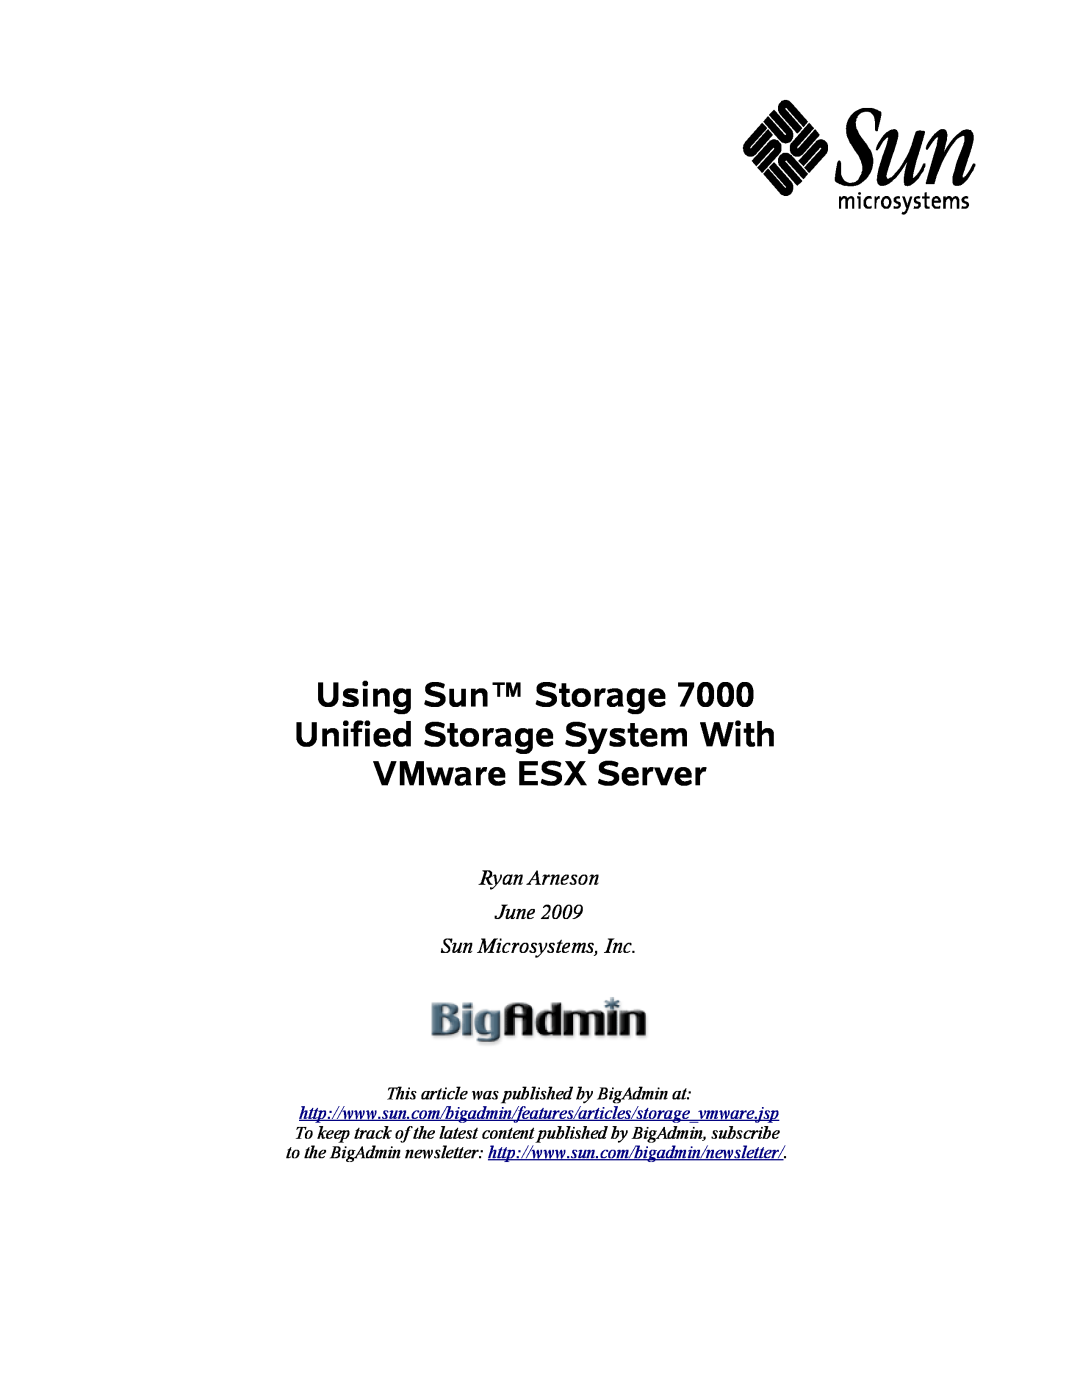 Sun Microsystems 7000 manual Ryan Arneson June Sun Microsystems, Inc, This article was published by BigAdmin at 